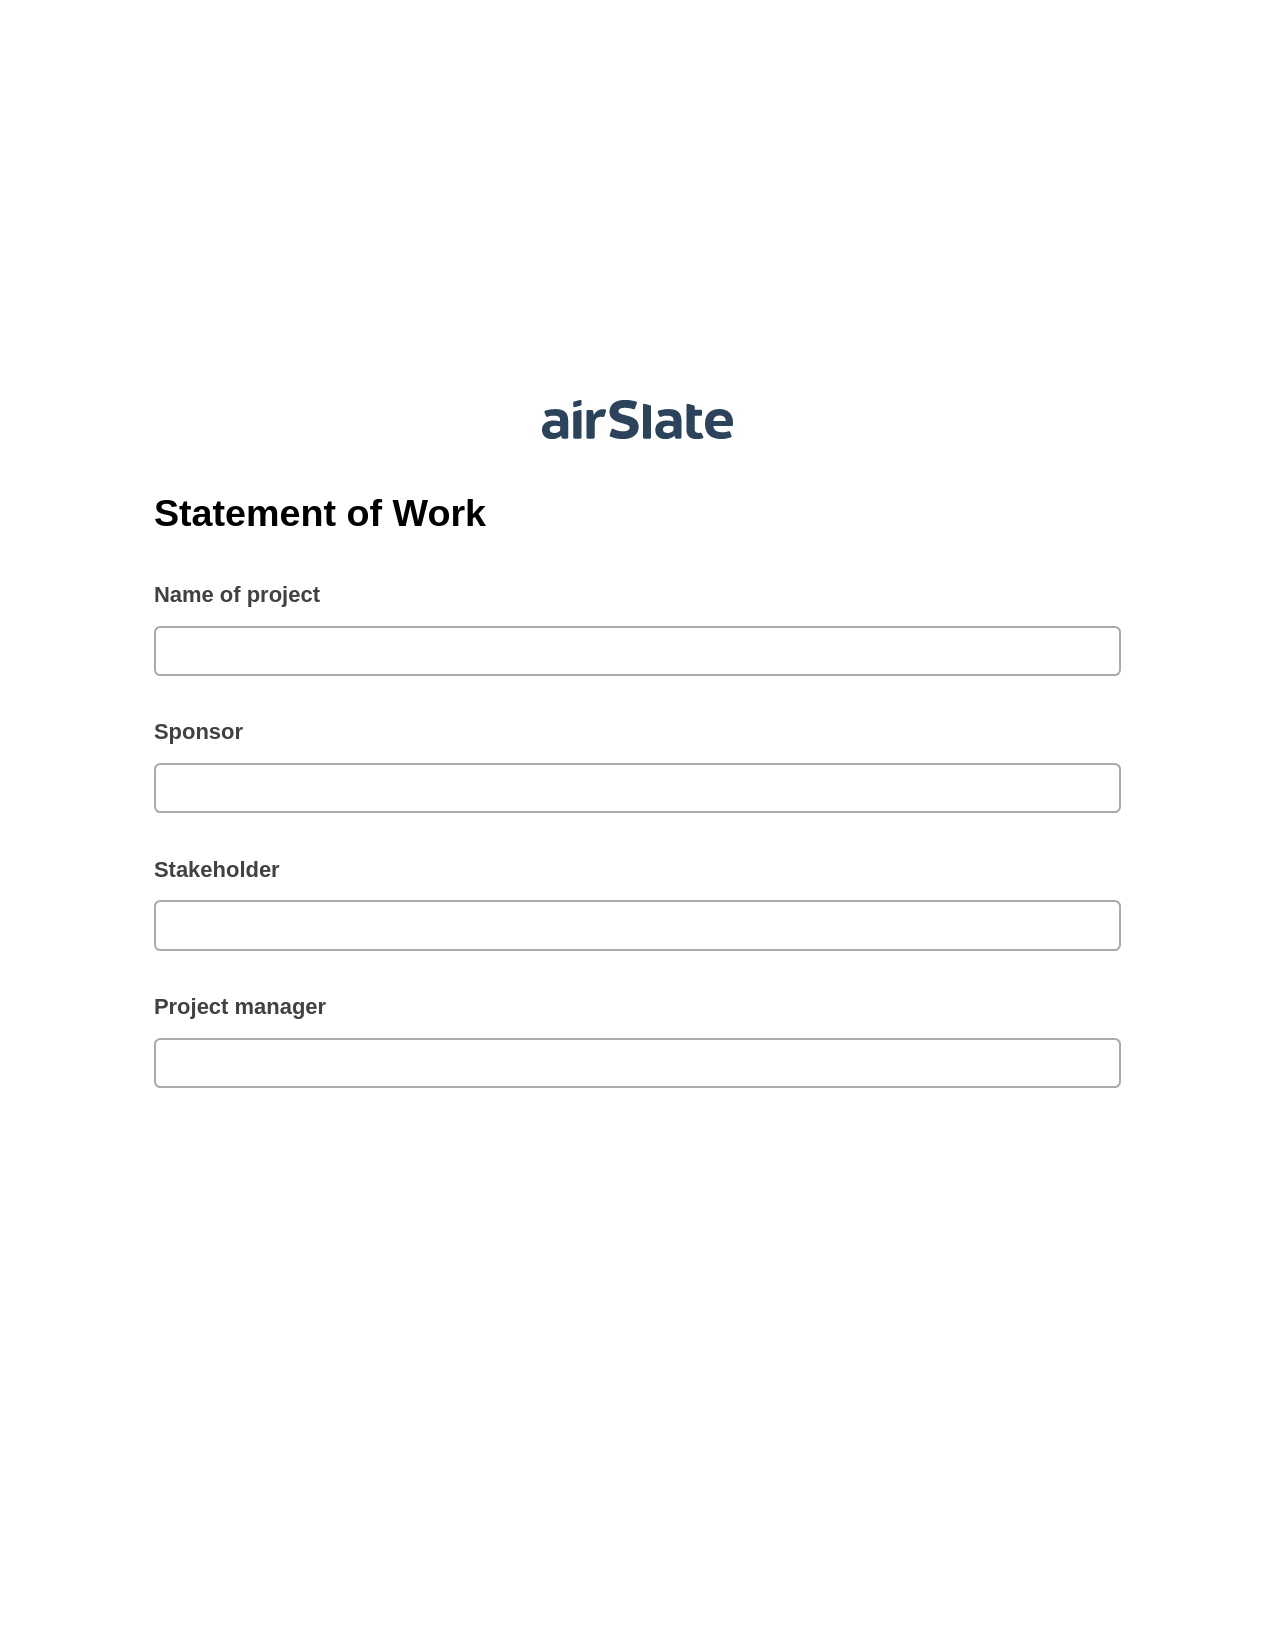 Statement of Work Pre-fill from another Slate Bot, Lock the slate bot, Post-finish Document Bot